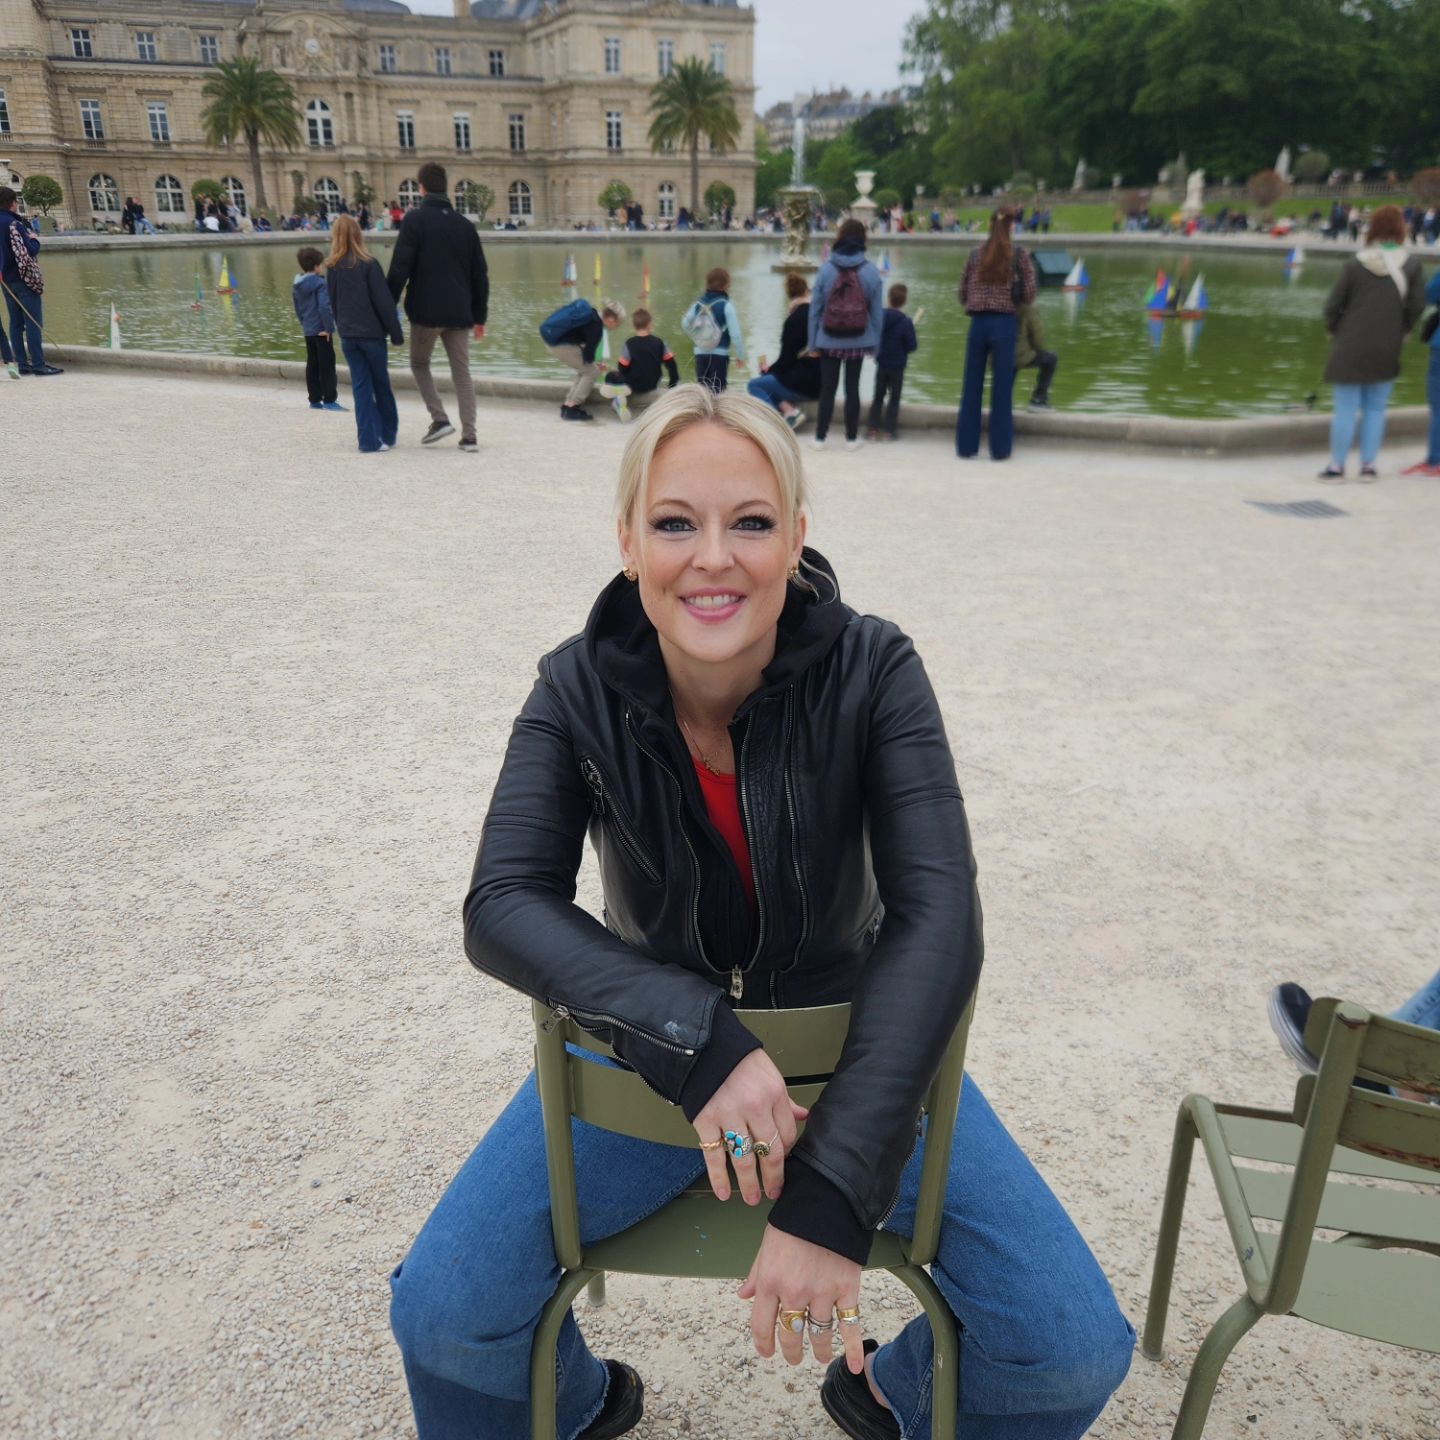 So happy to be back in Paris! We love it here. Now that I have done the quintessential sites on other visits, I have enjoyed a much slower pace just enjoying the vibes and finding cool streets to wander.  Today through the Latin quarter and spent some time at the Luxembourg gardens after some hot Ramen
Now if only the sun would come out. I'm FREEZING! 
#Paris #travel #gotofrance #lovetotour #walkingtour #Luxembourggardens #france #parisolympics2024